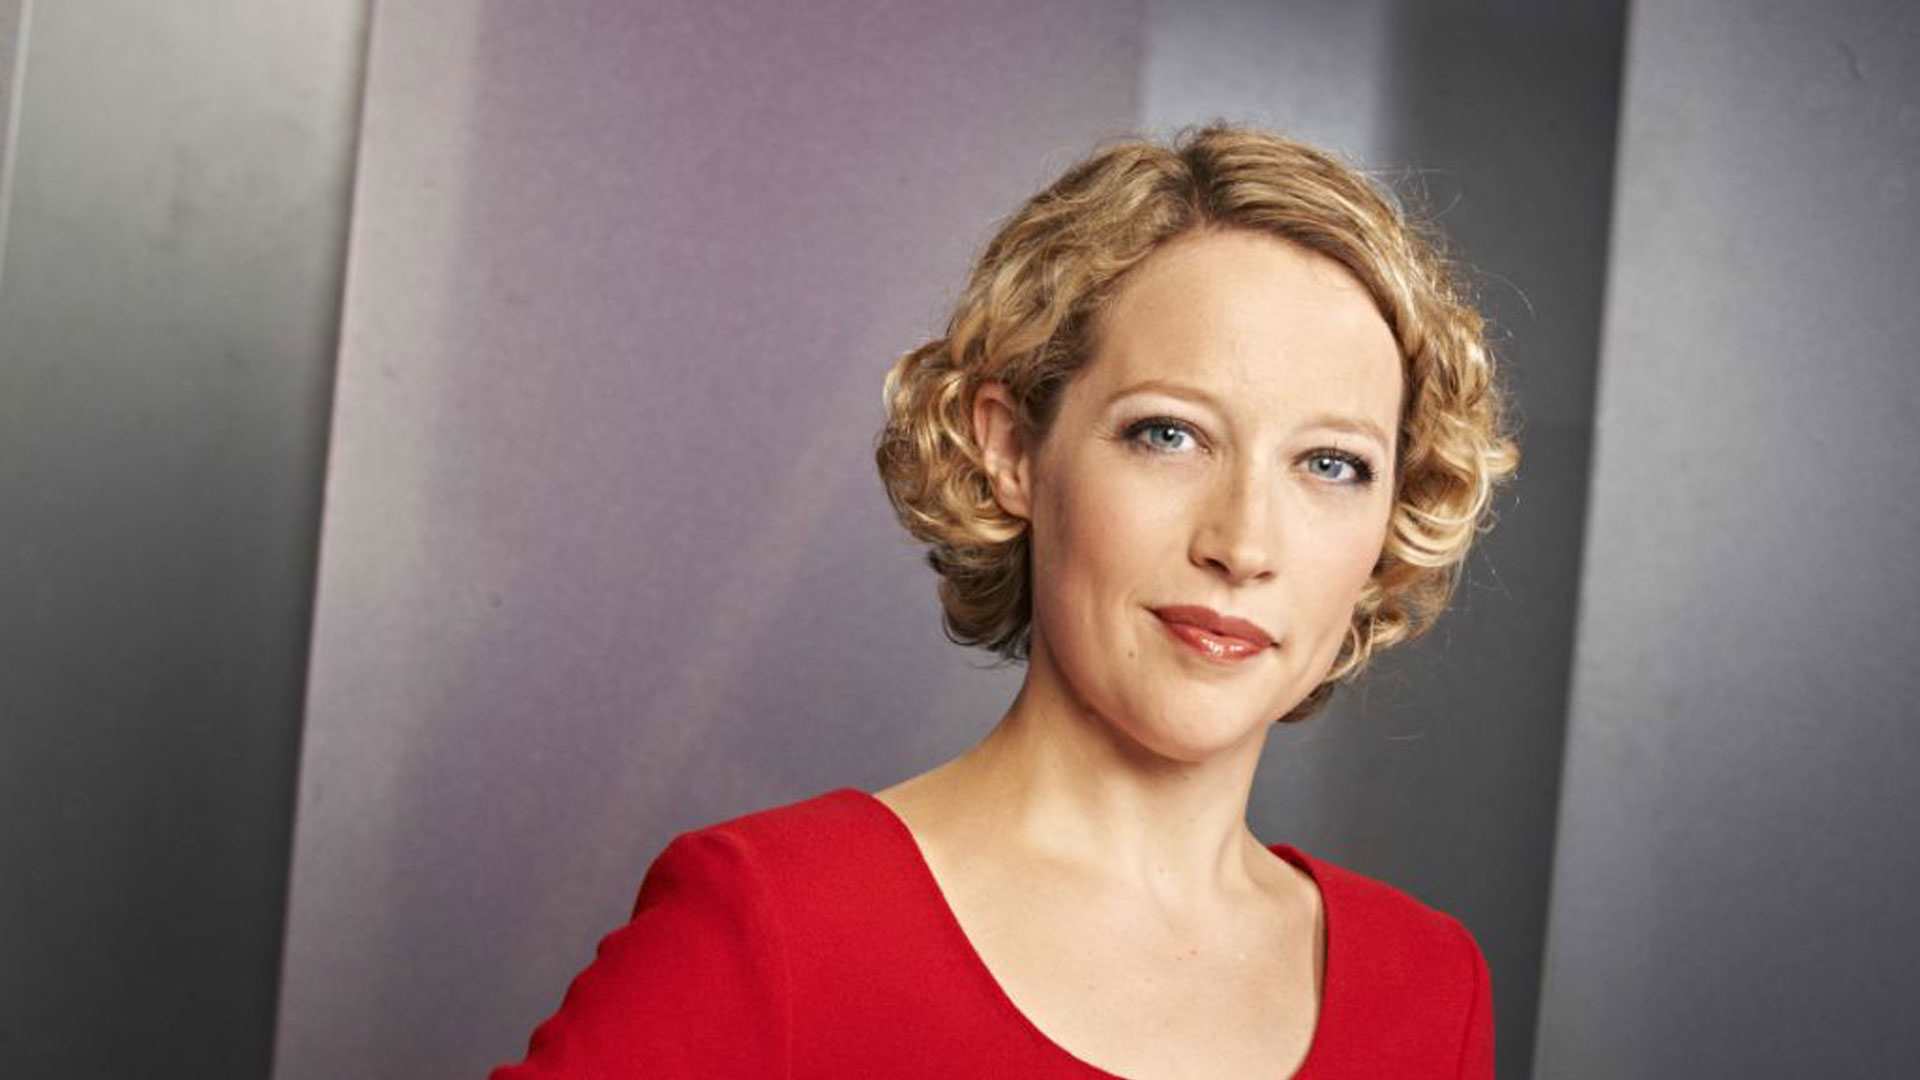 Journalist Cathy Newman in a red top in front of a grey background